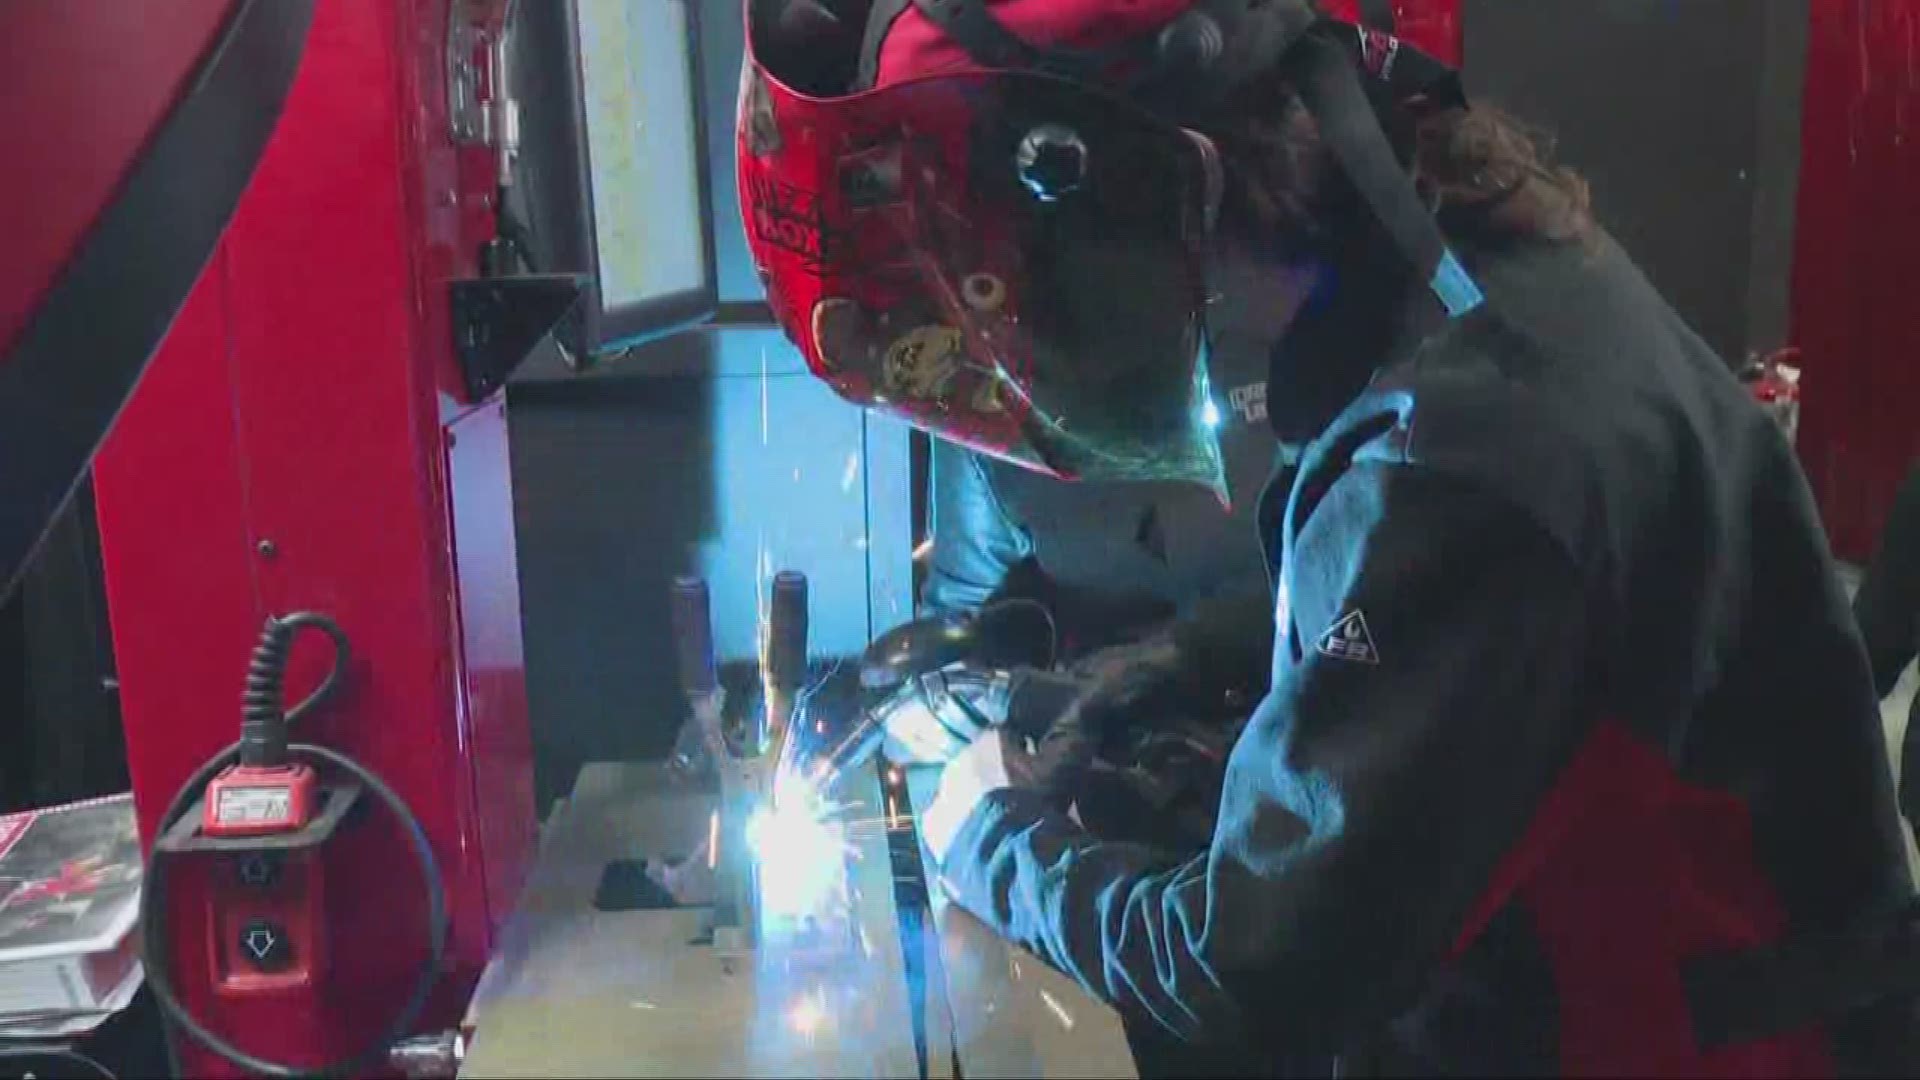 Girls in STEM: Welding, so much more than heat and metal